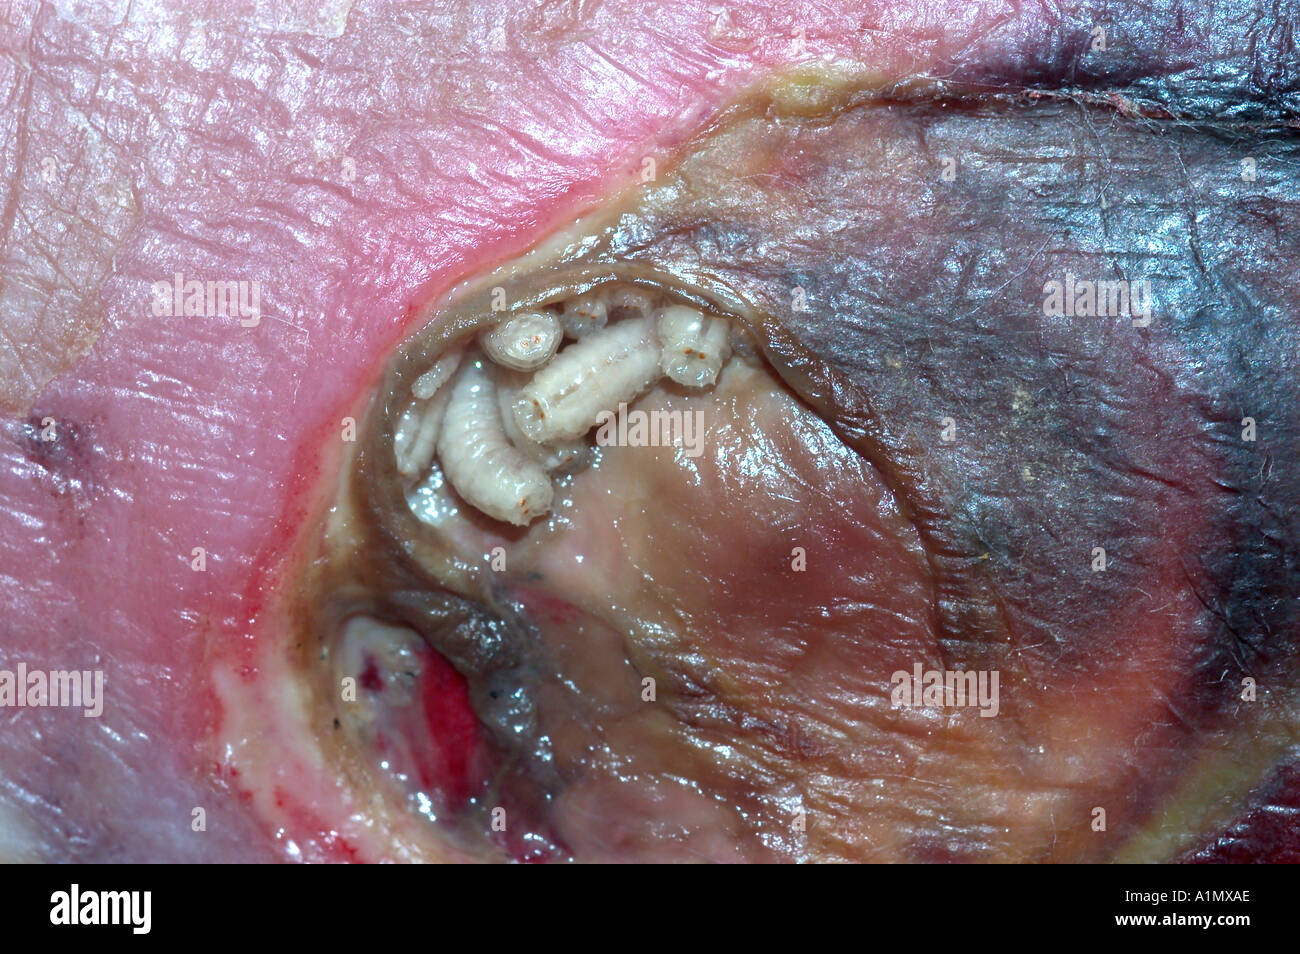 fly maggots found in ankle wound ulcer of elderly male Stock Photo - Alamy